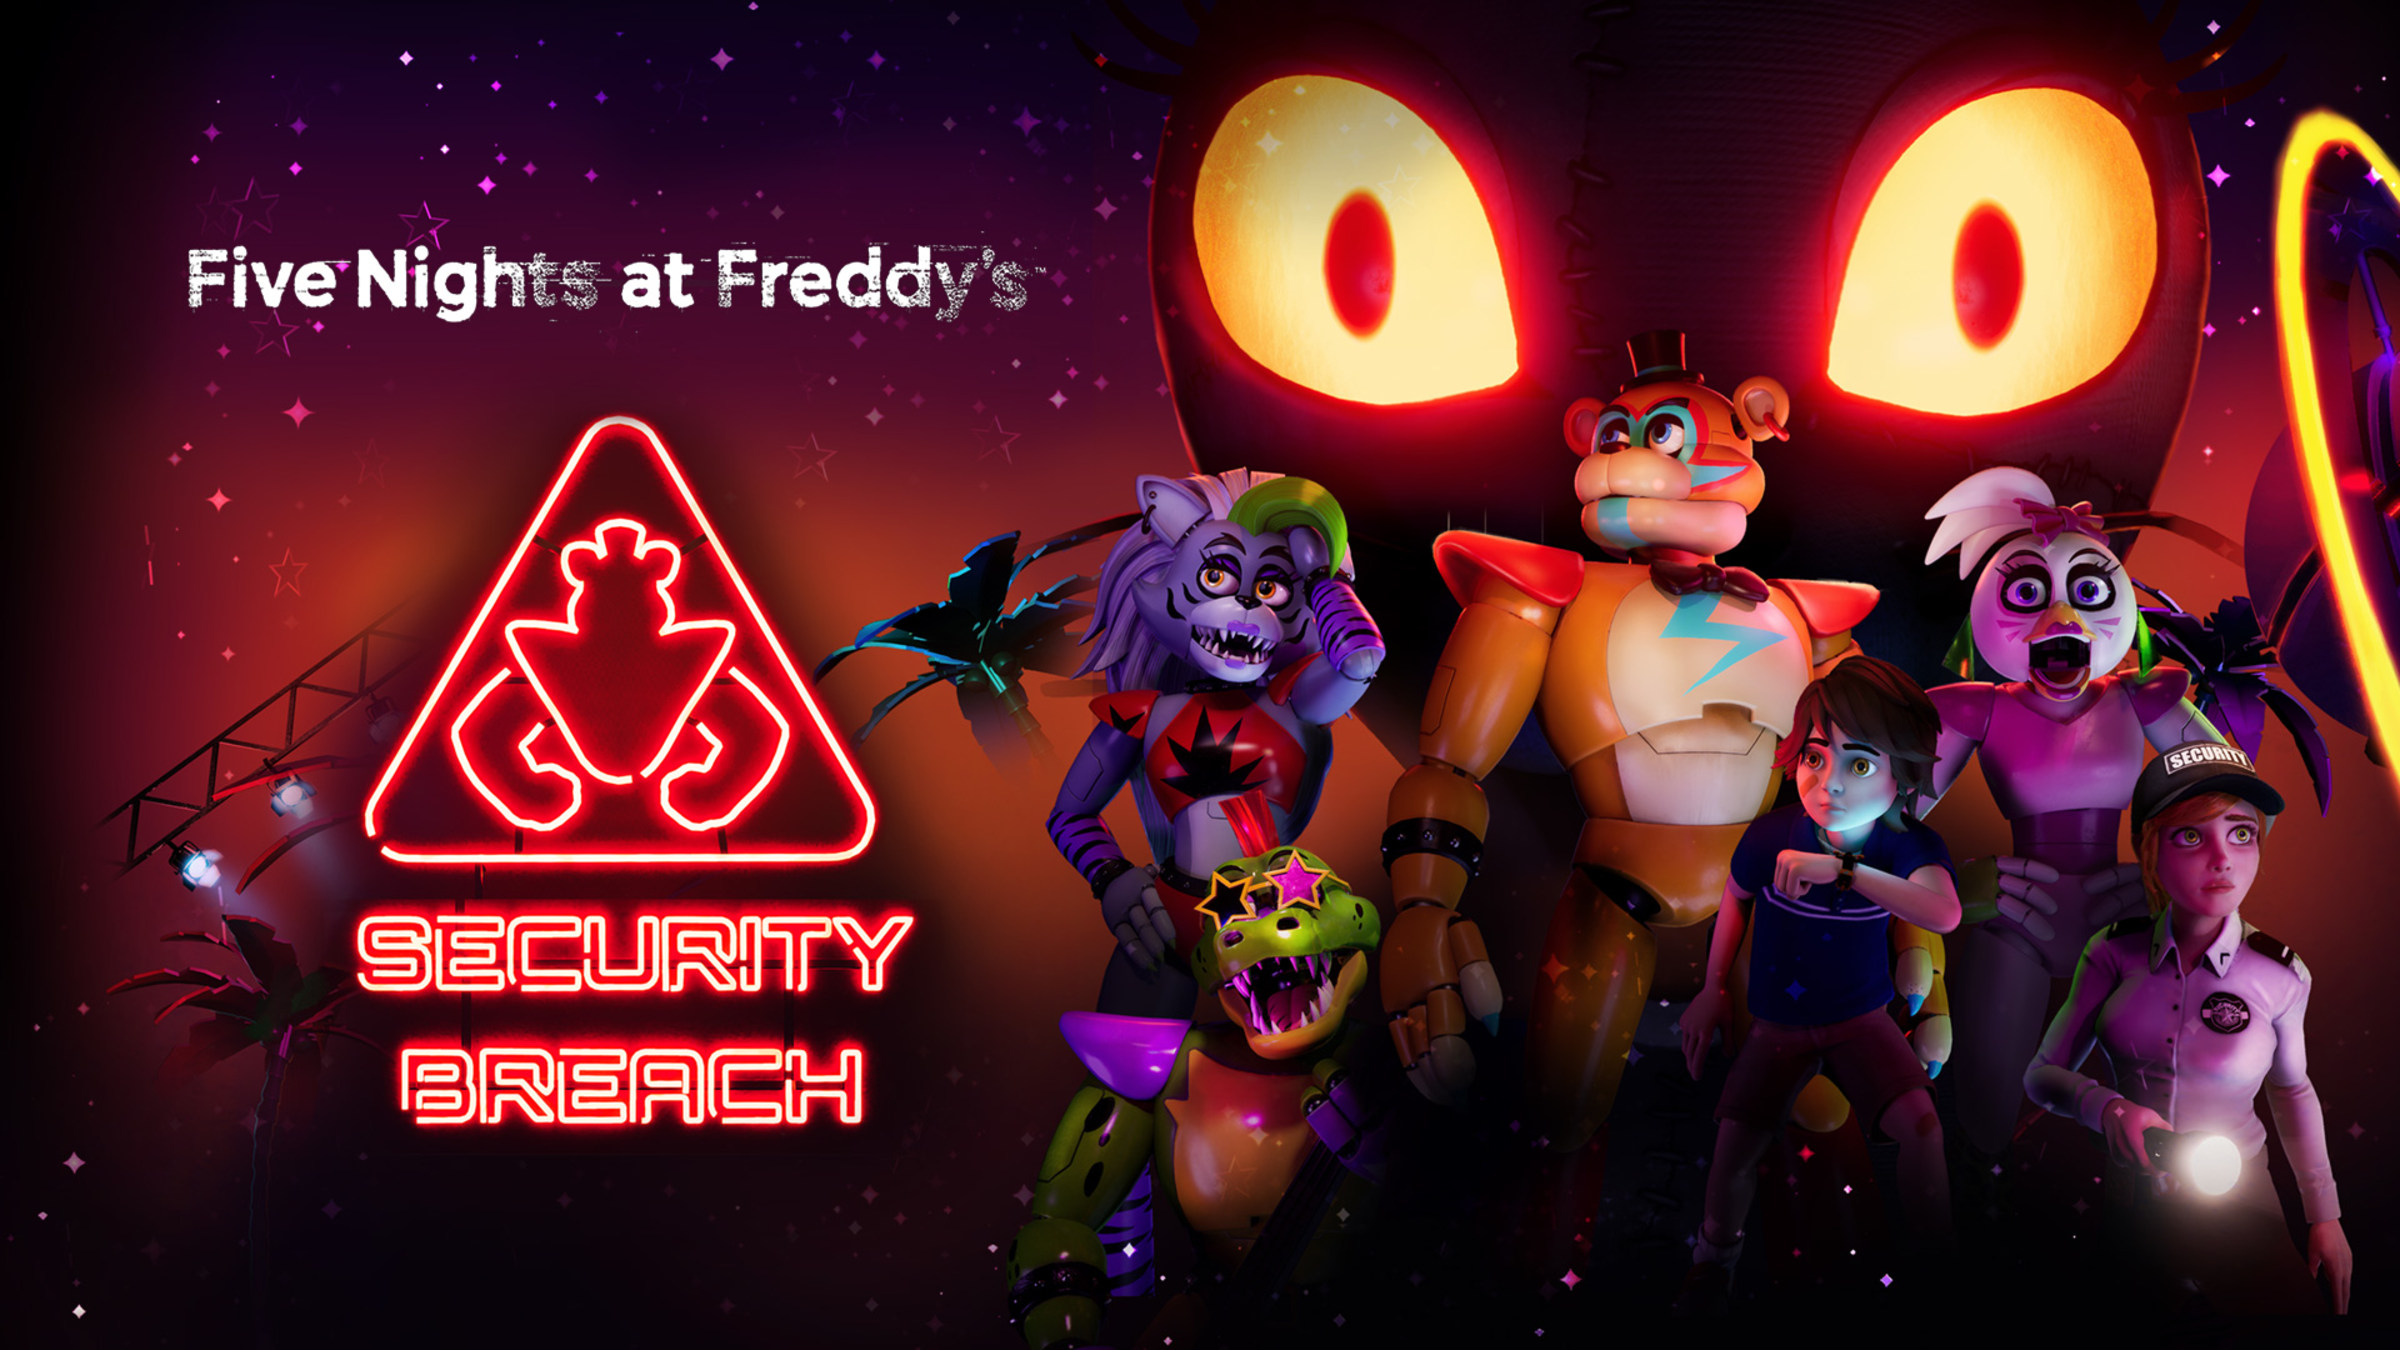 Fnaf security breach pictures